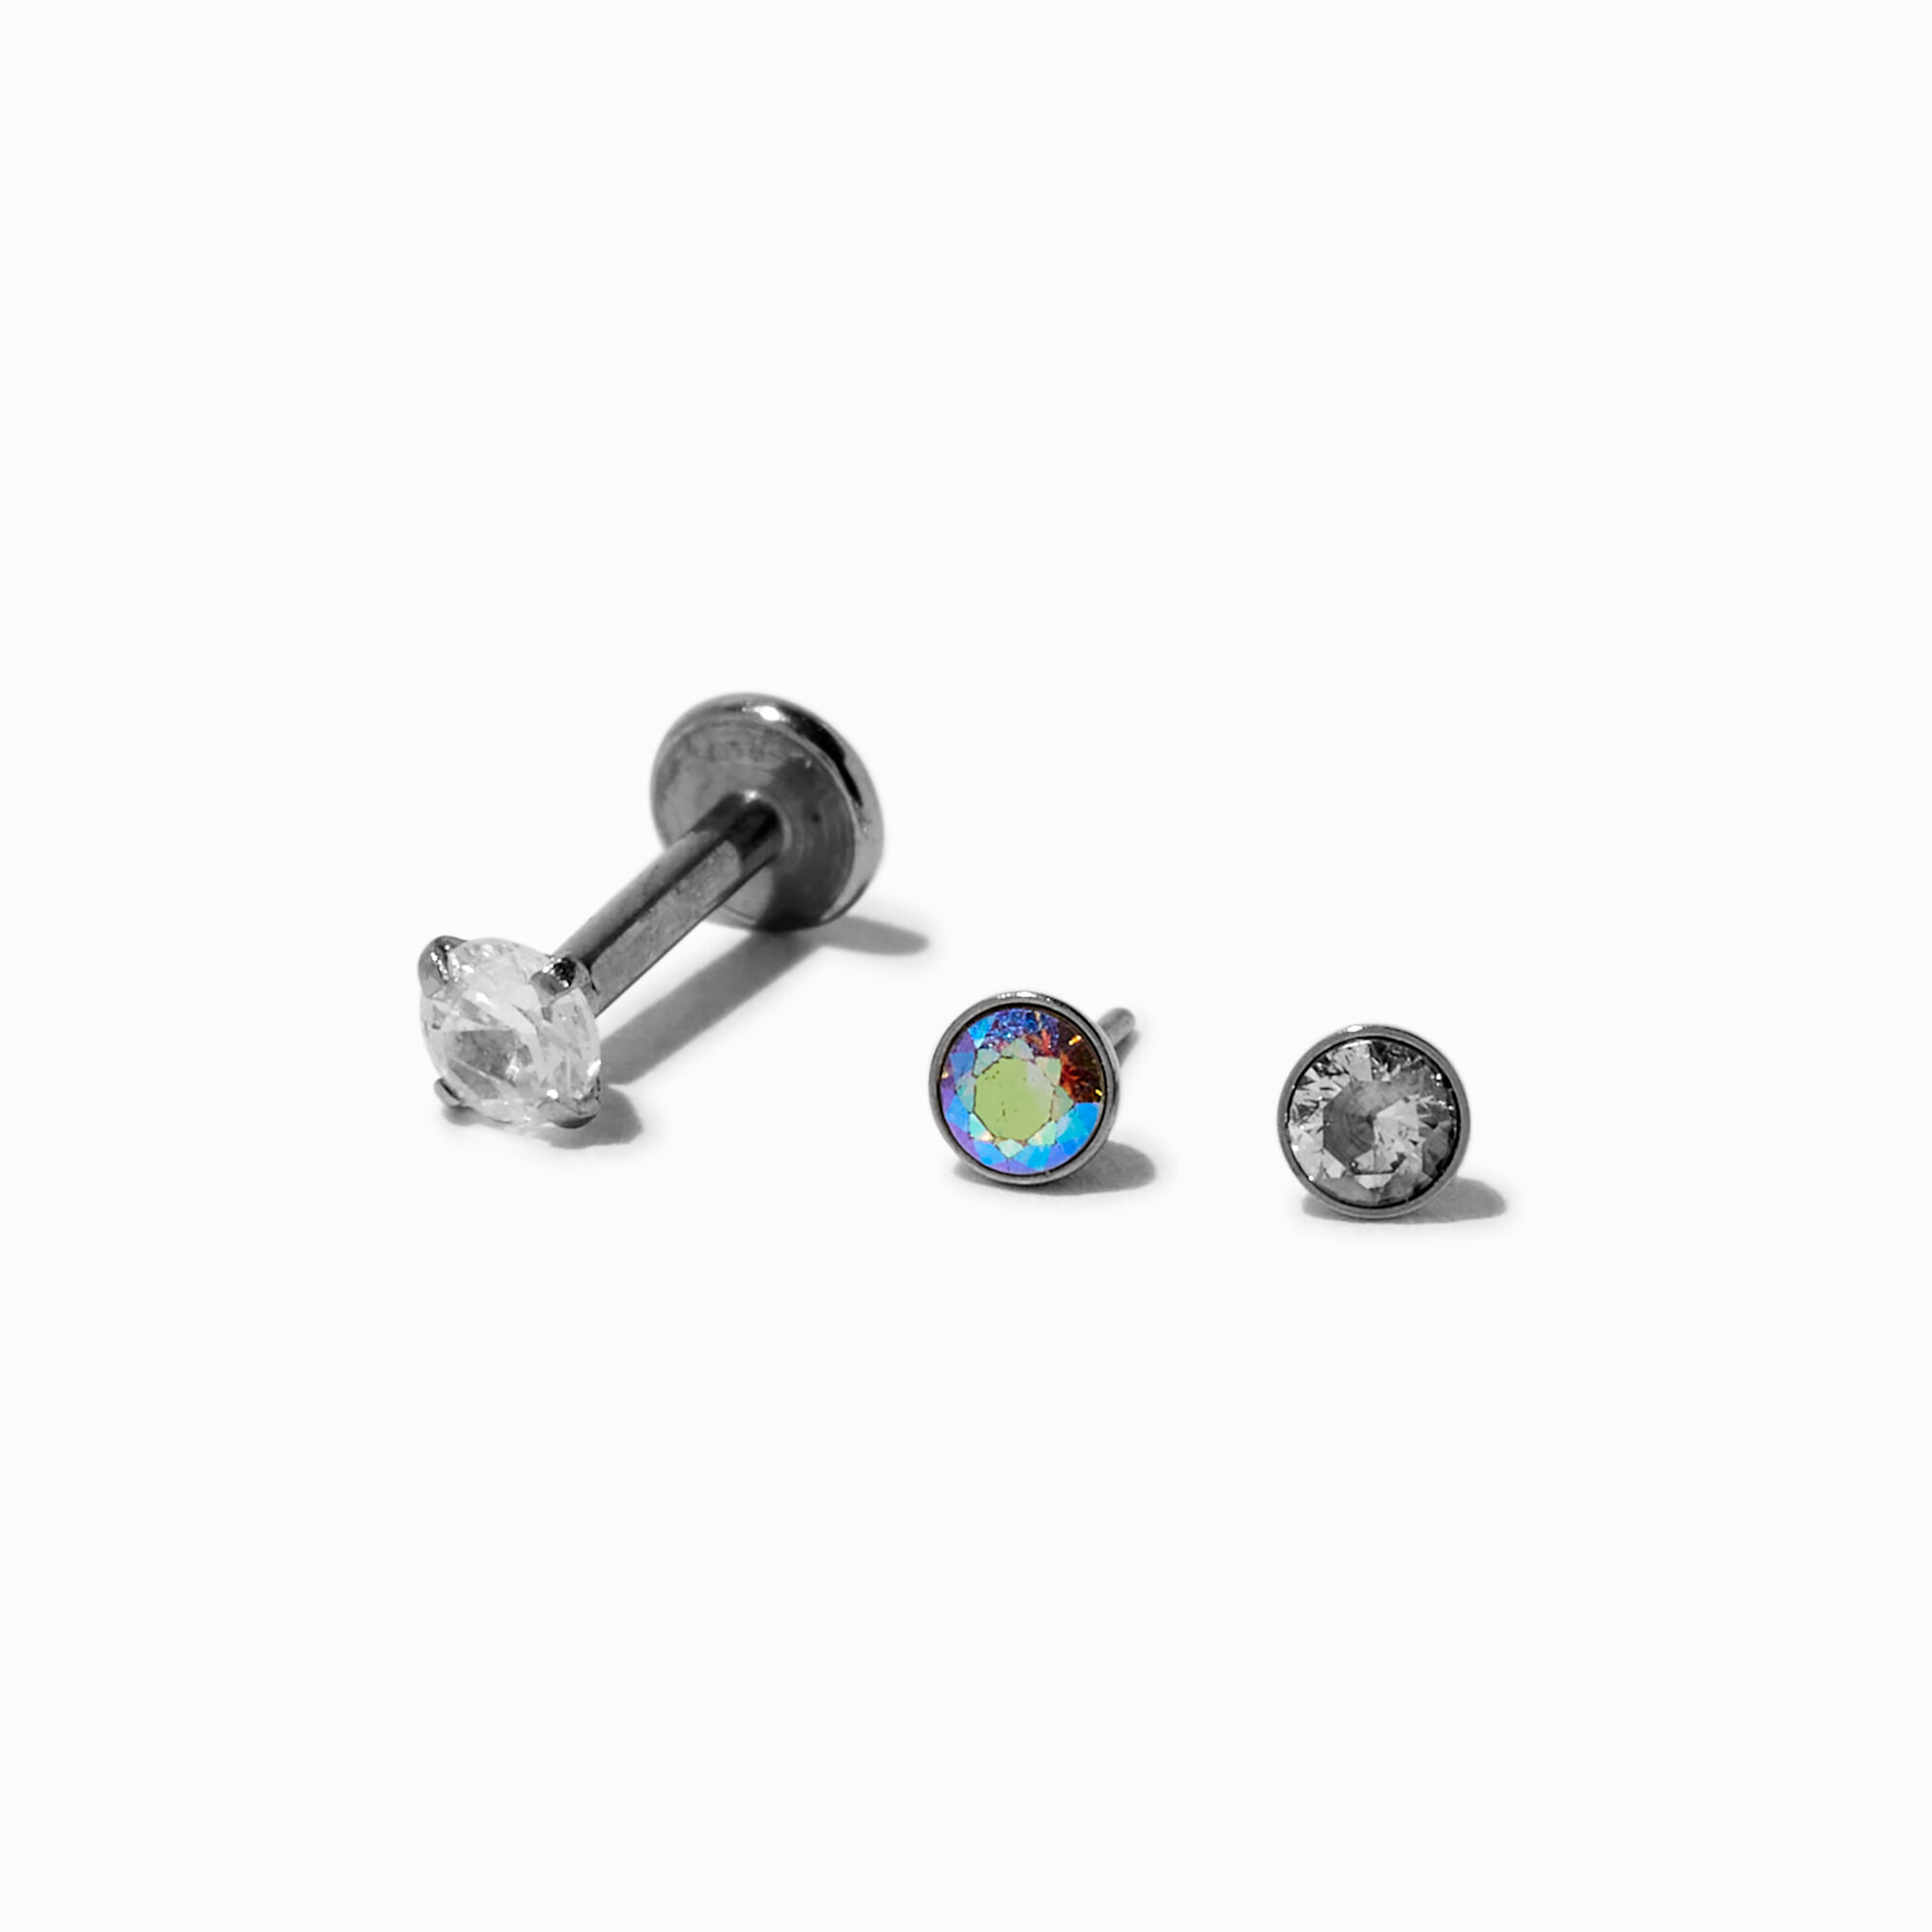 View Claires Tone Anodized 16G Stud Threadless Cartilage Earrings 3 Pack Silver information